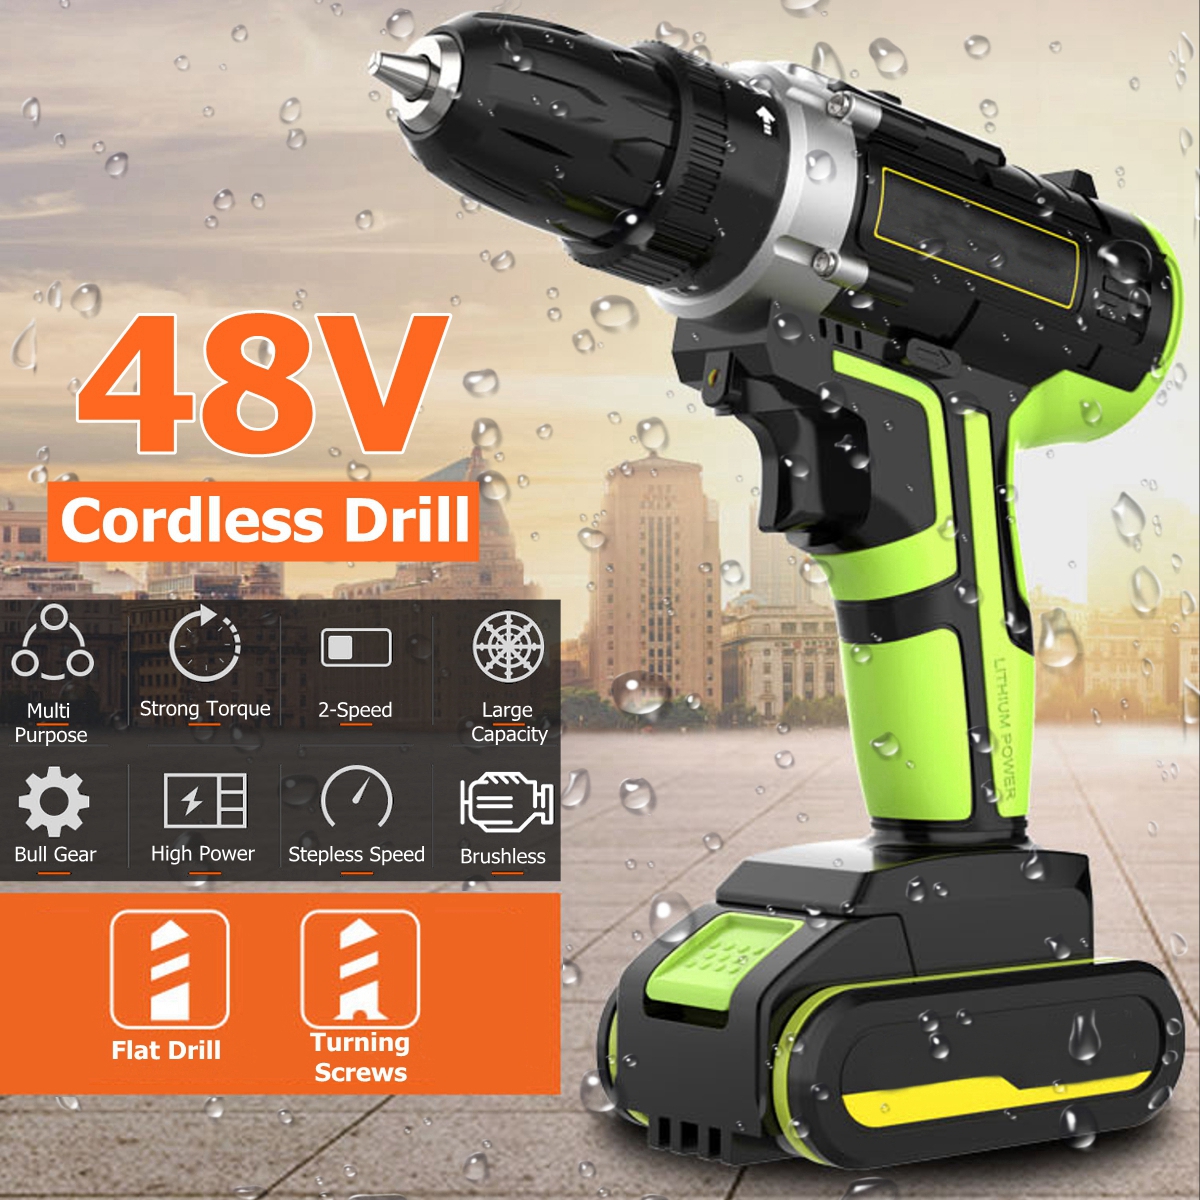 2 In 1 Cordless Drill 48V Double Speed Power Drills Electric Screwdriver LED lighting 1/2Pcs Large Capacity Battery 